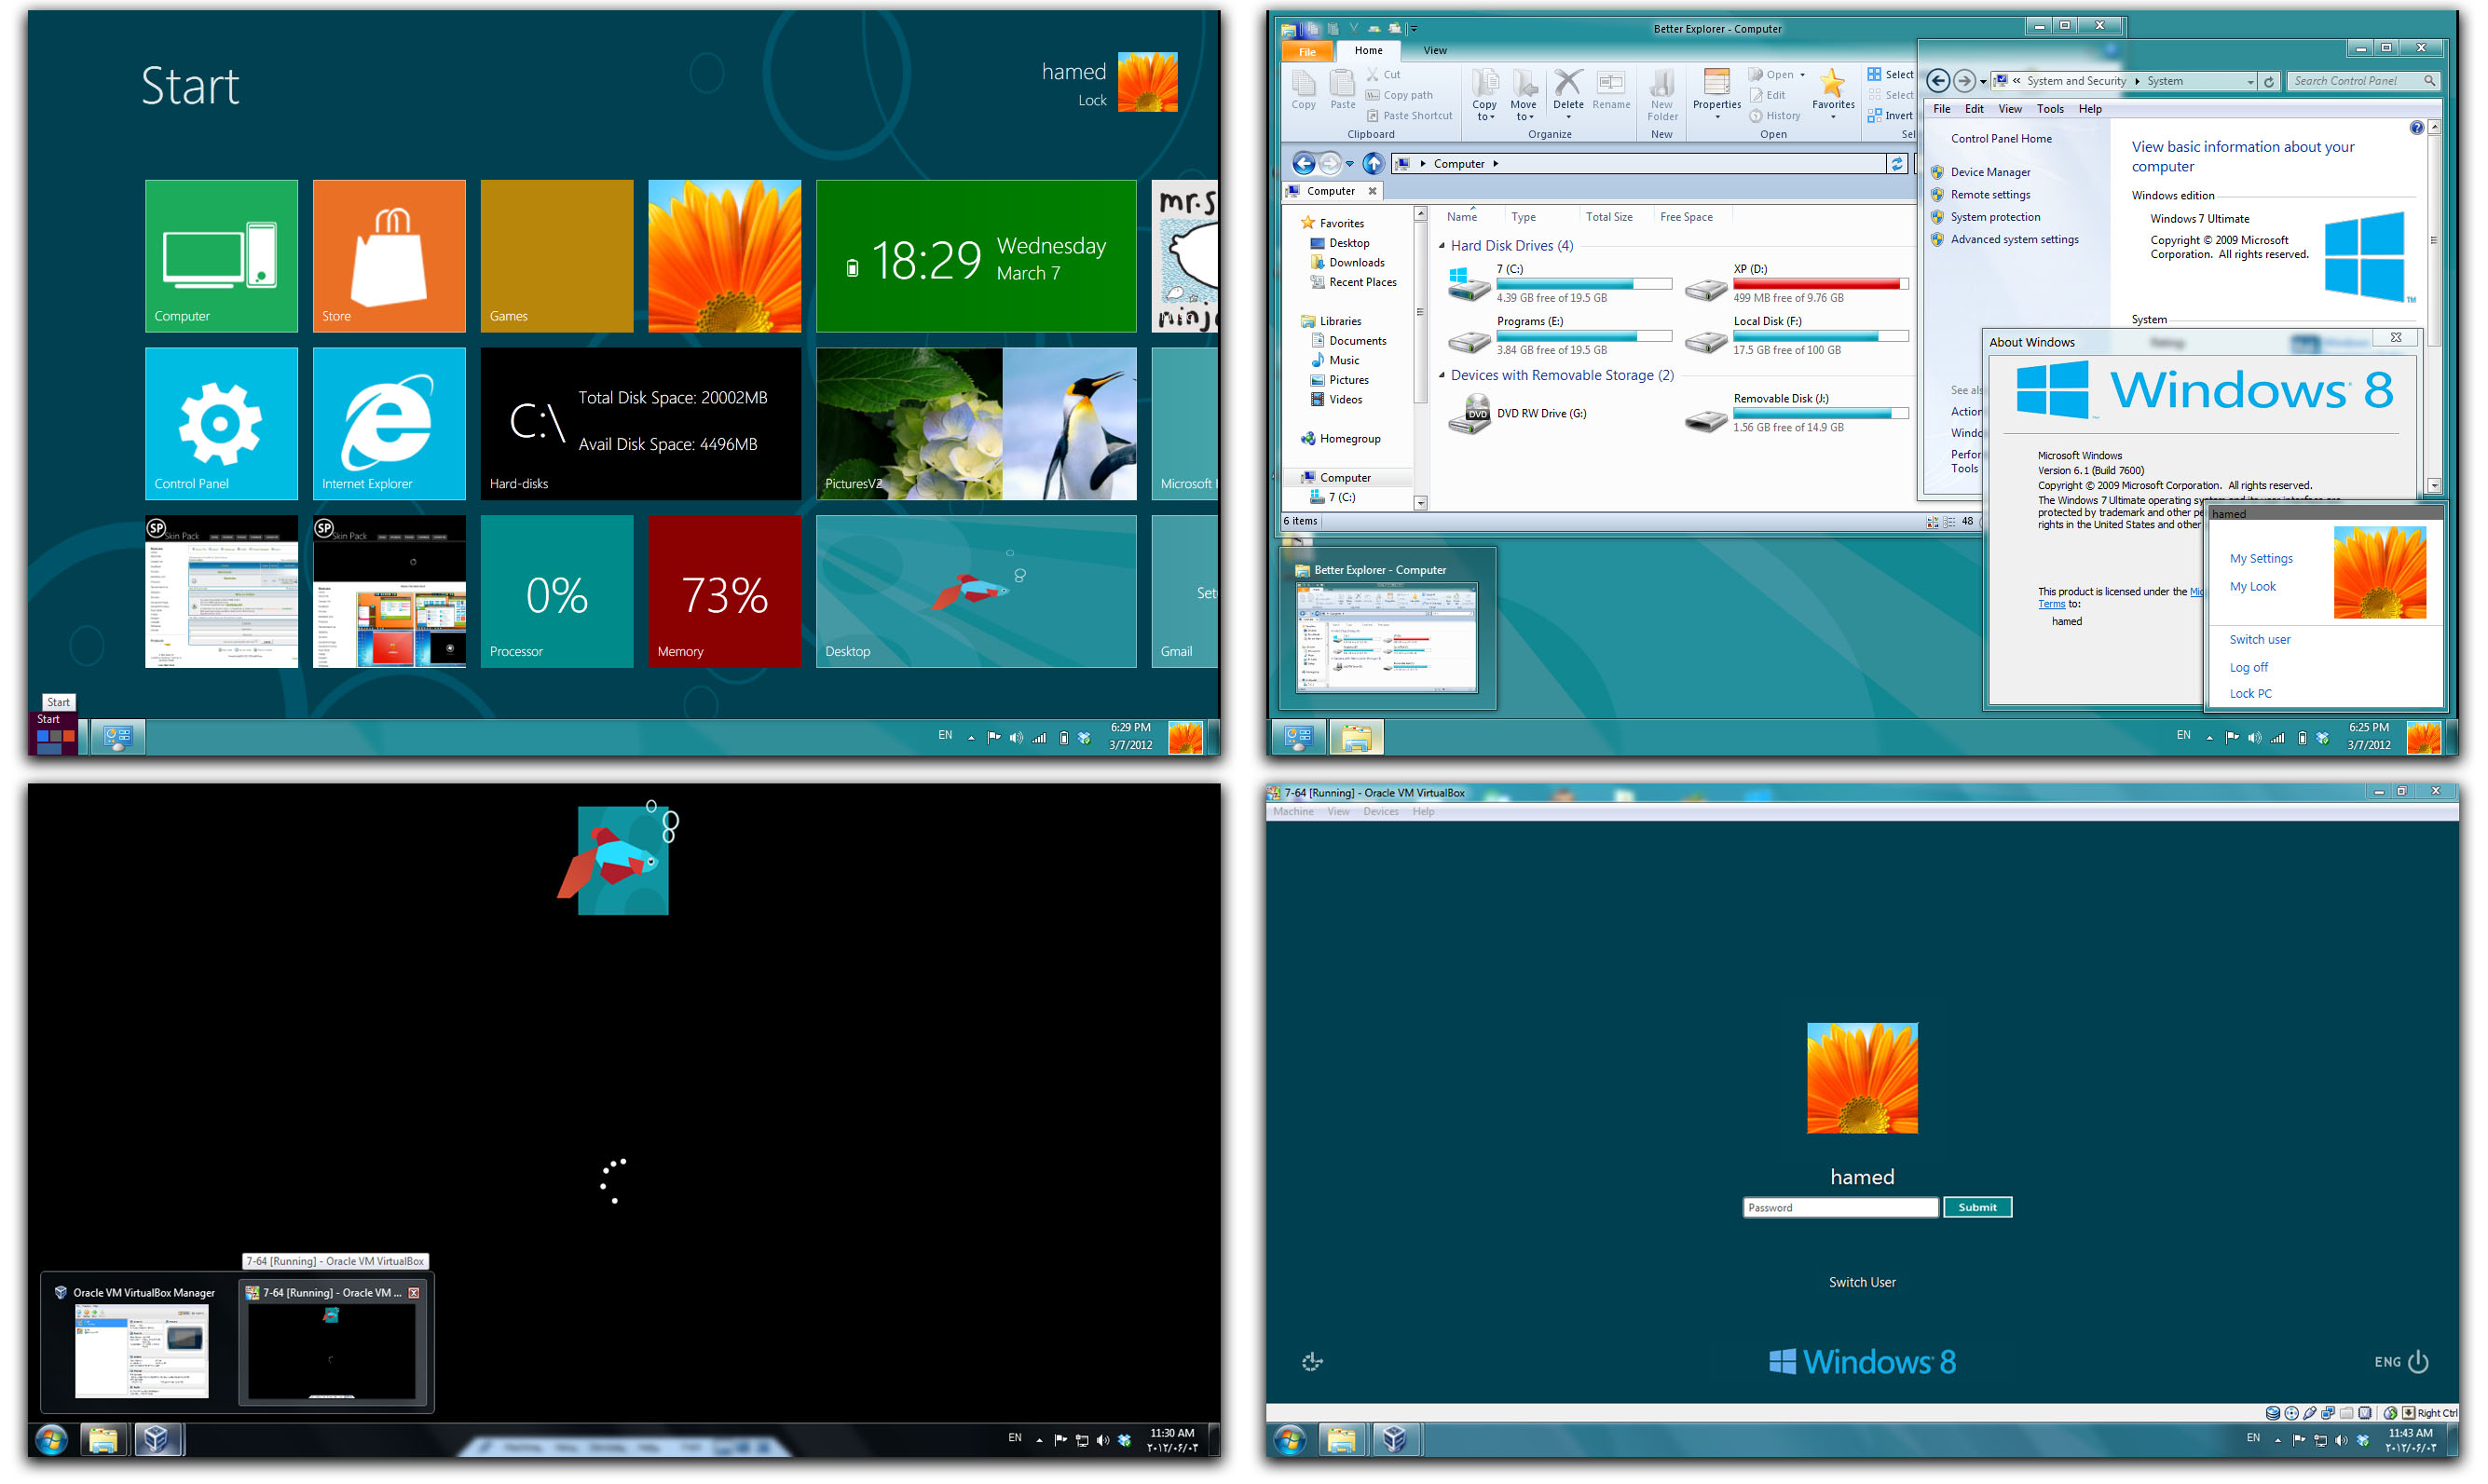 Download Skin Pack Windows 8 Consumer Preview Production